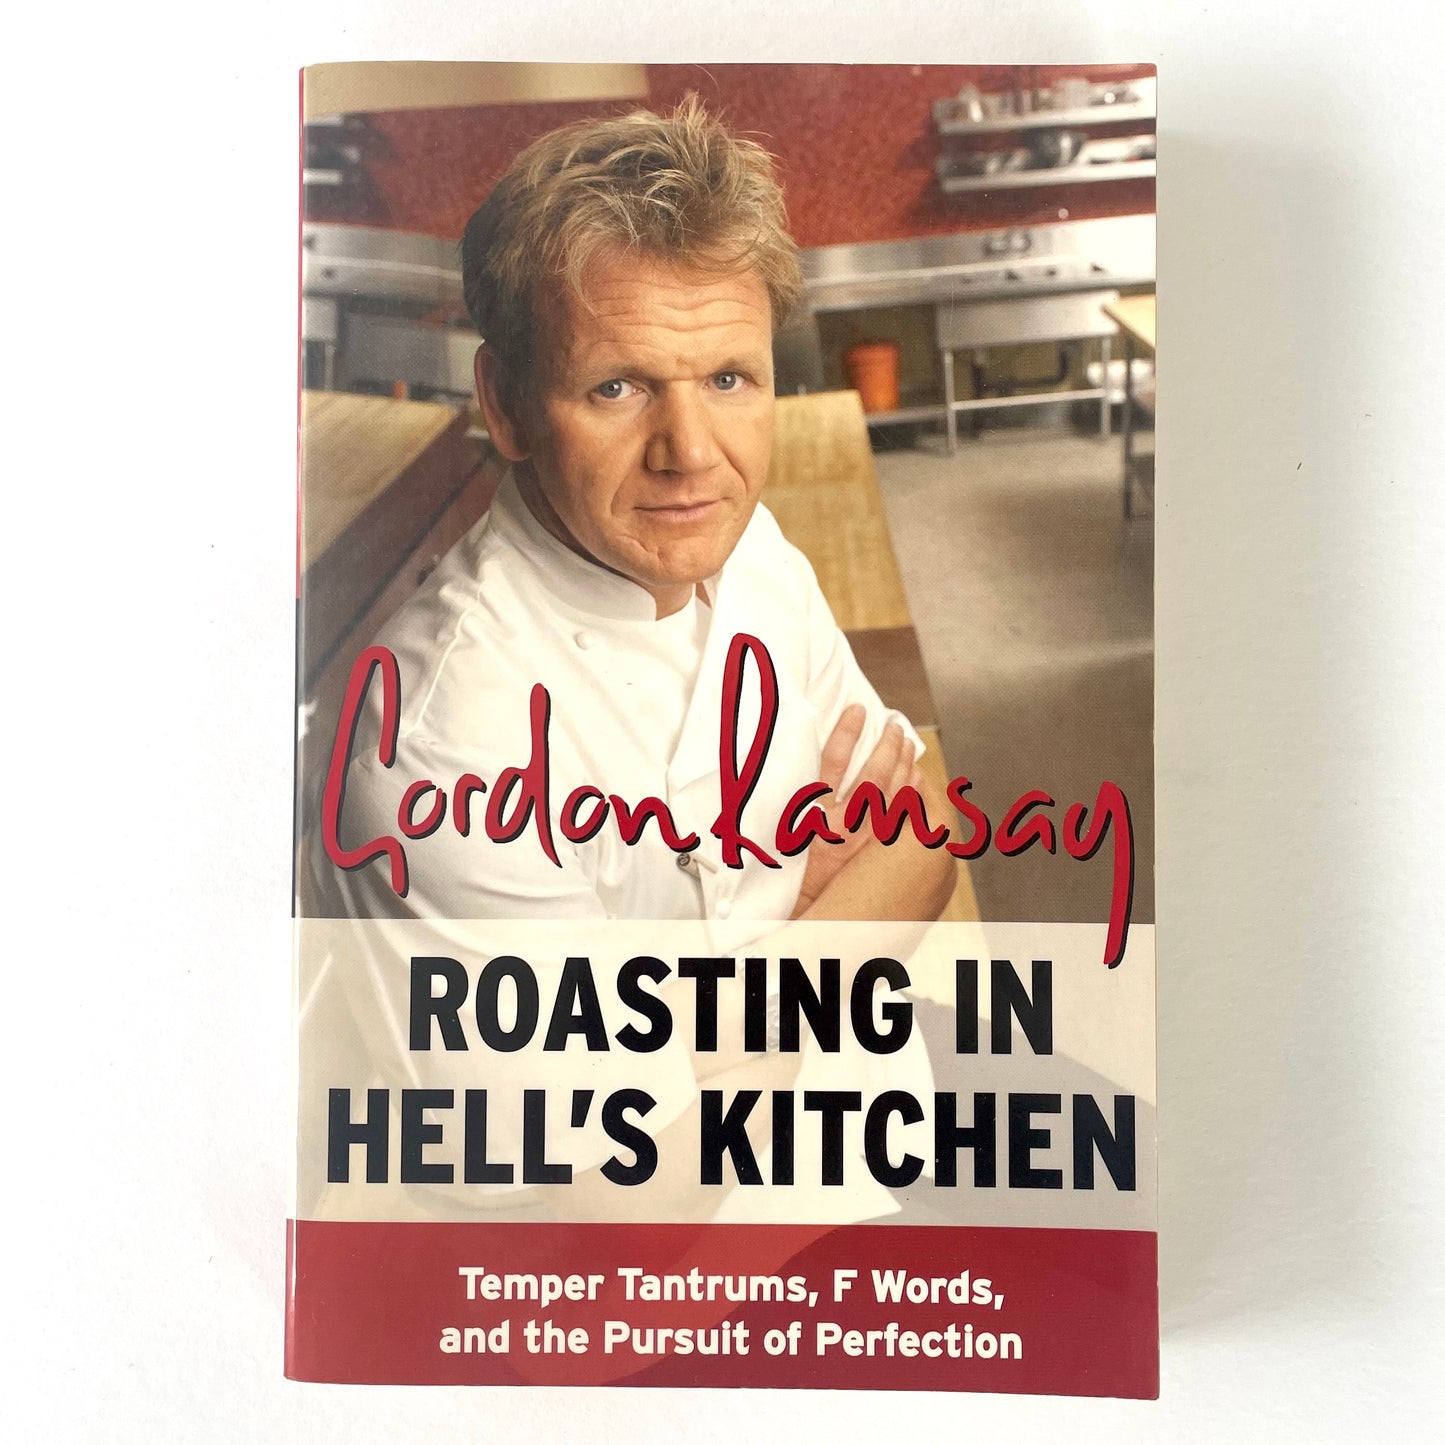 Roasting in Hell's Kitchen by Gordon Ramsey